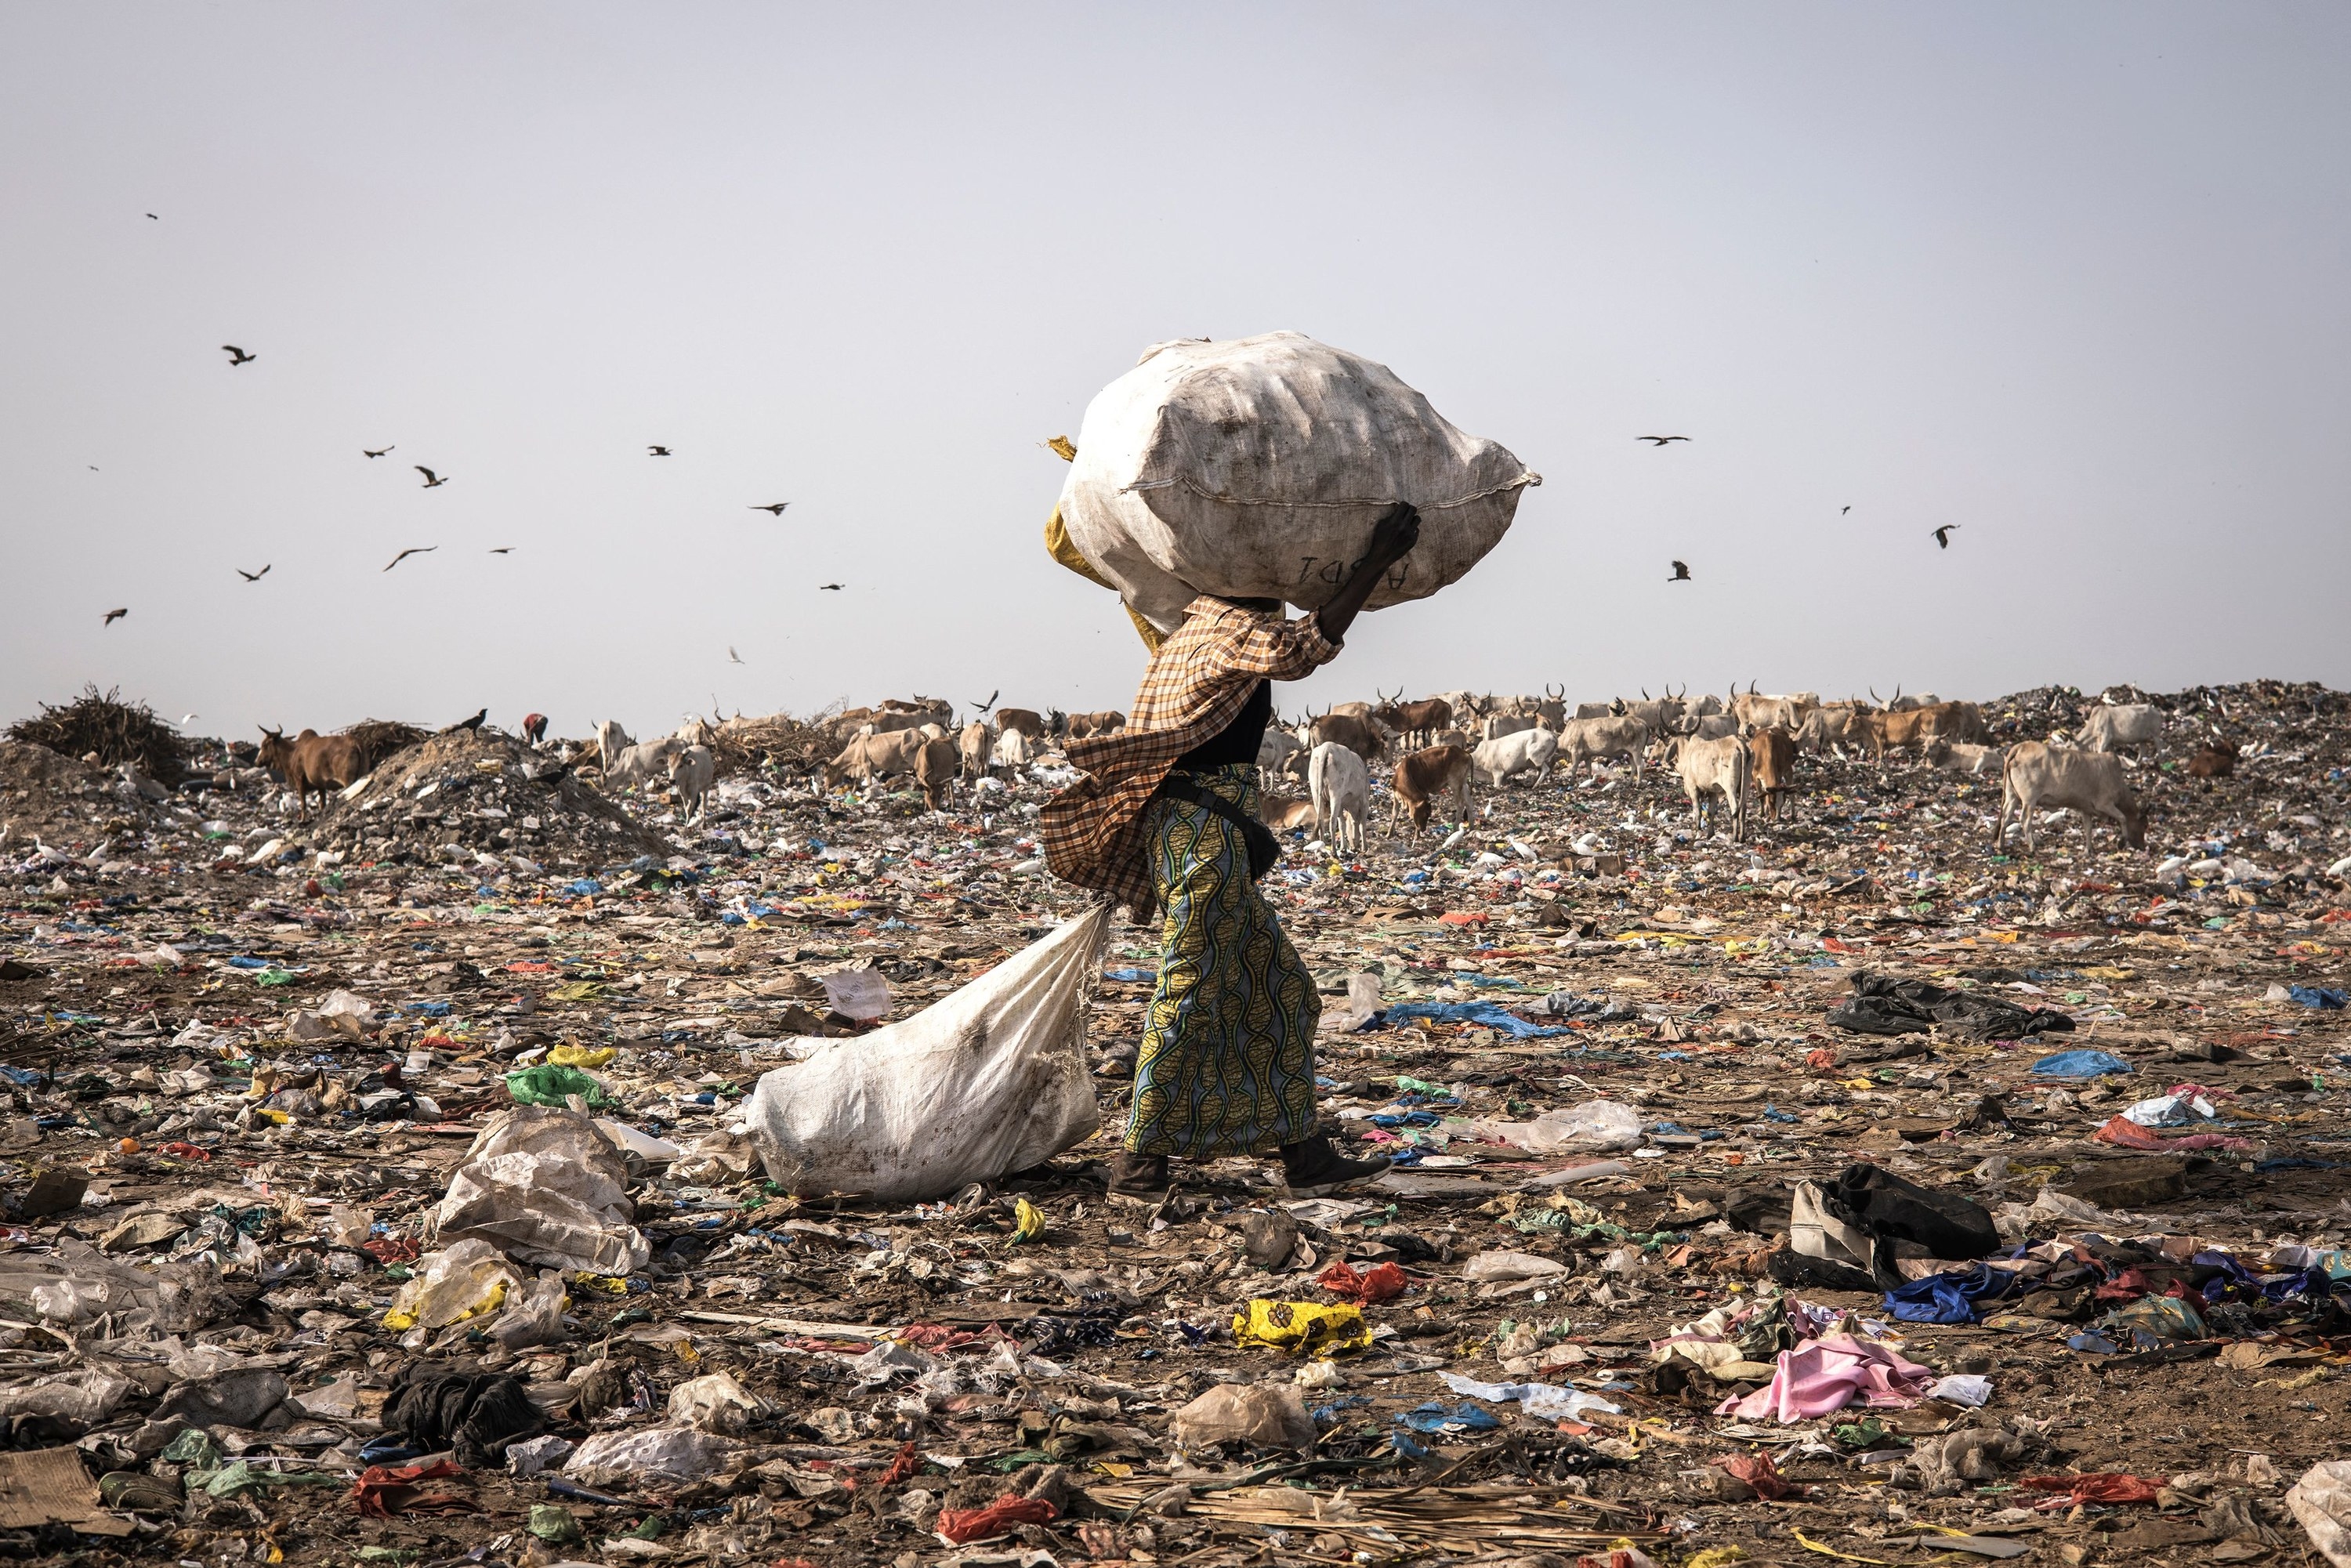 A person is seen walking among garbage with a bag of trash on their shoulder and cows are in the distance grazing